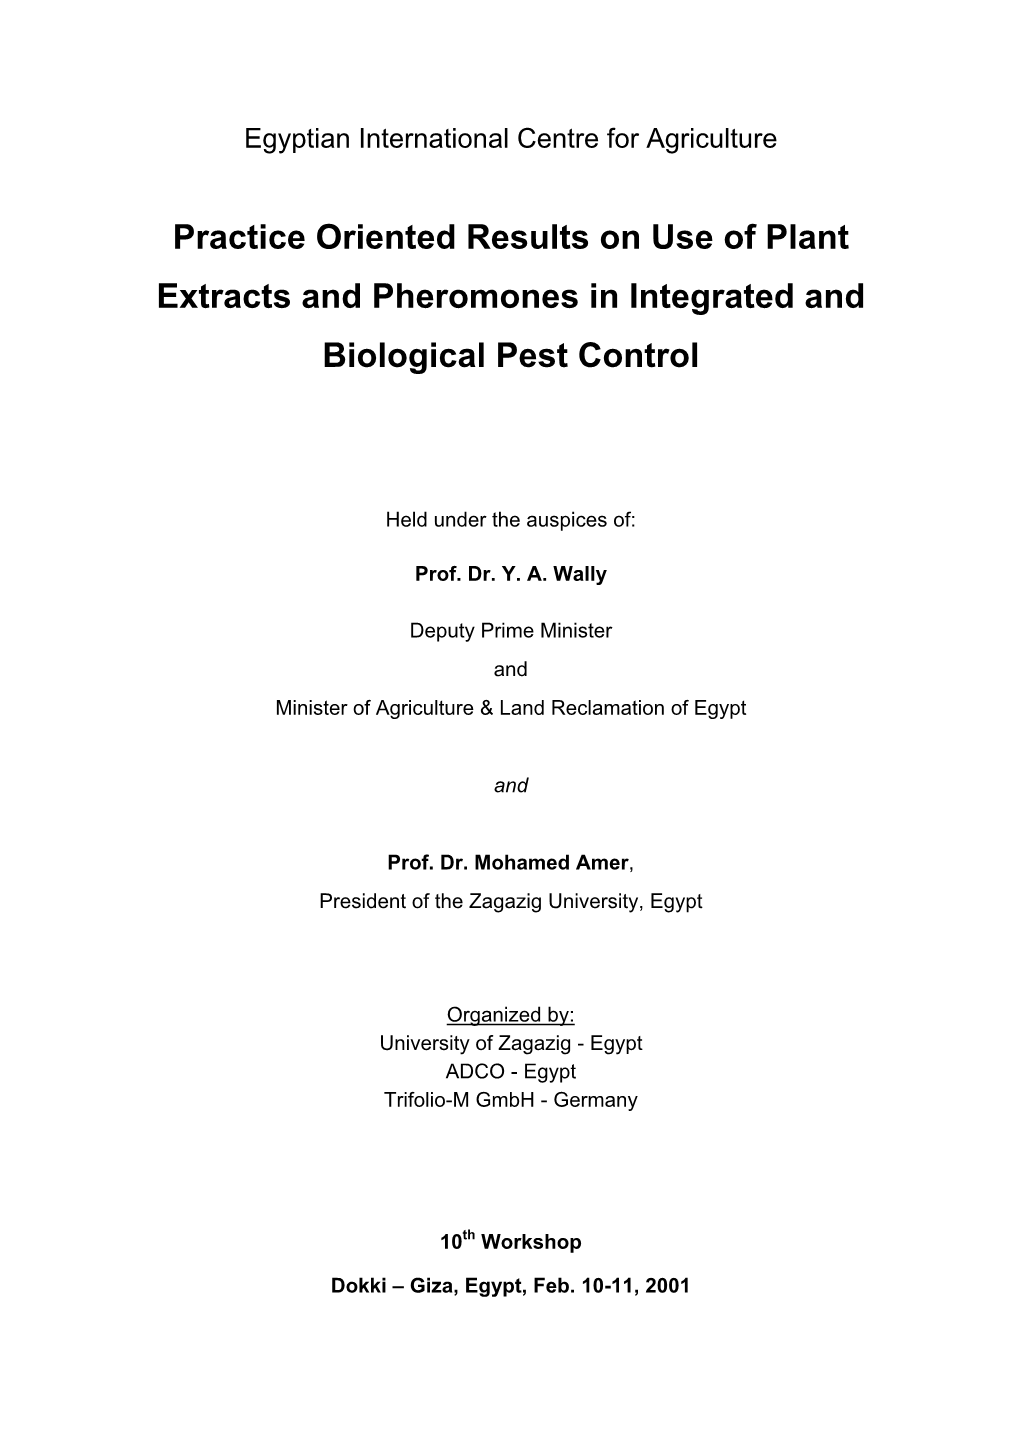 Practice Oriented Results on Use of Plant Extracts and Pheromones in Integrated and Biological Pest Control